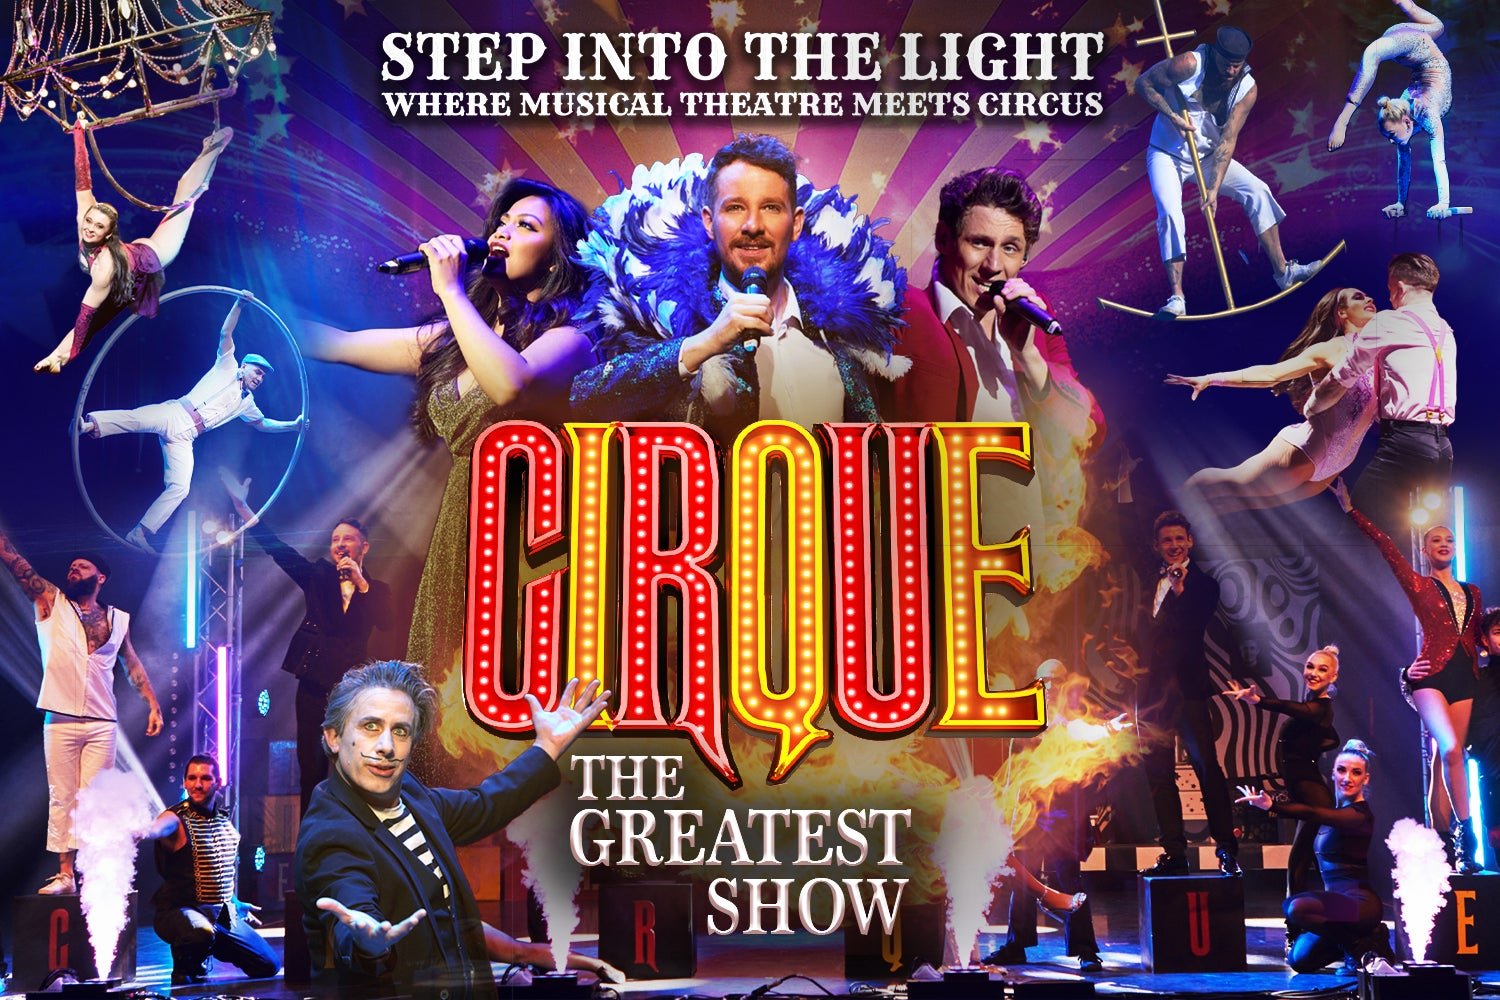 Cirque: the Greatest Show at Scarborough Spa Grand Hall, Scarborough